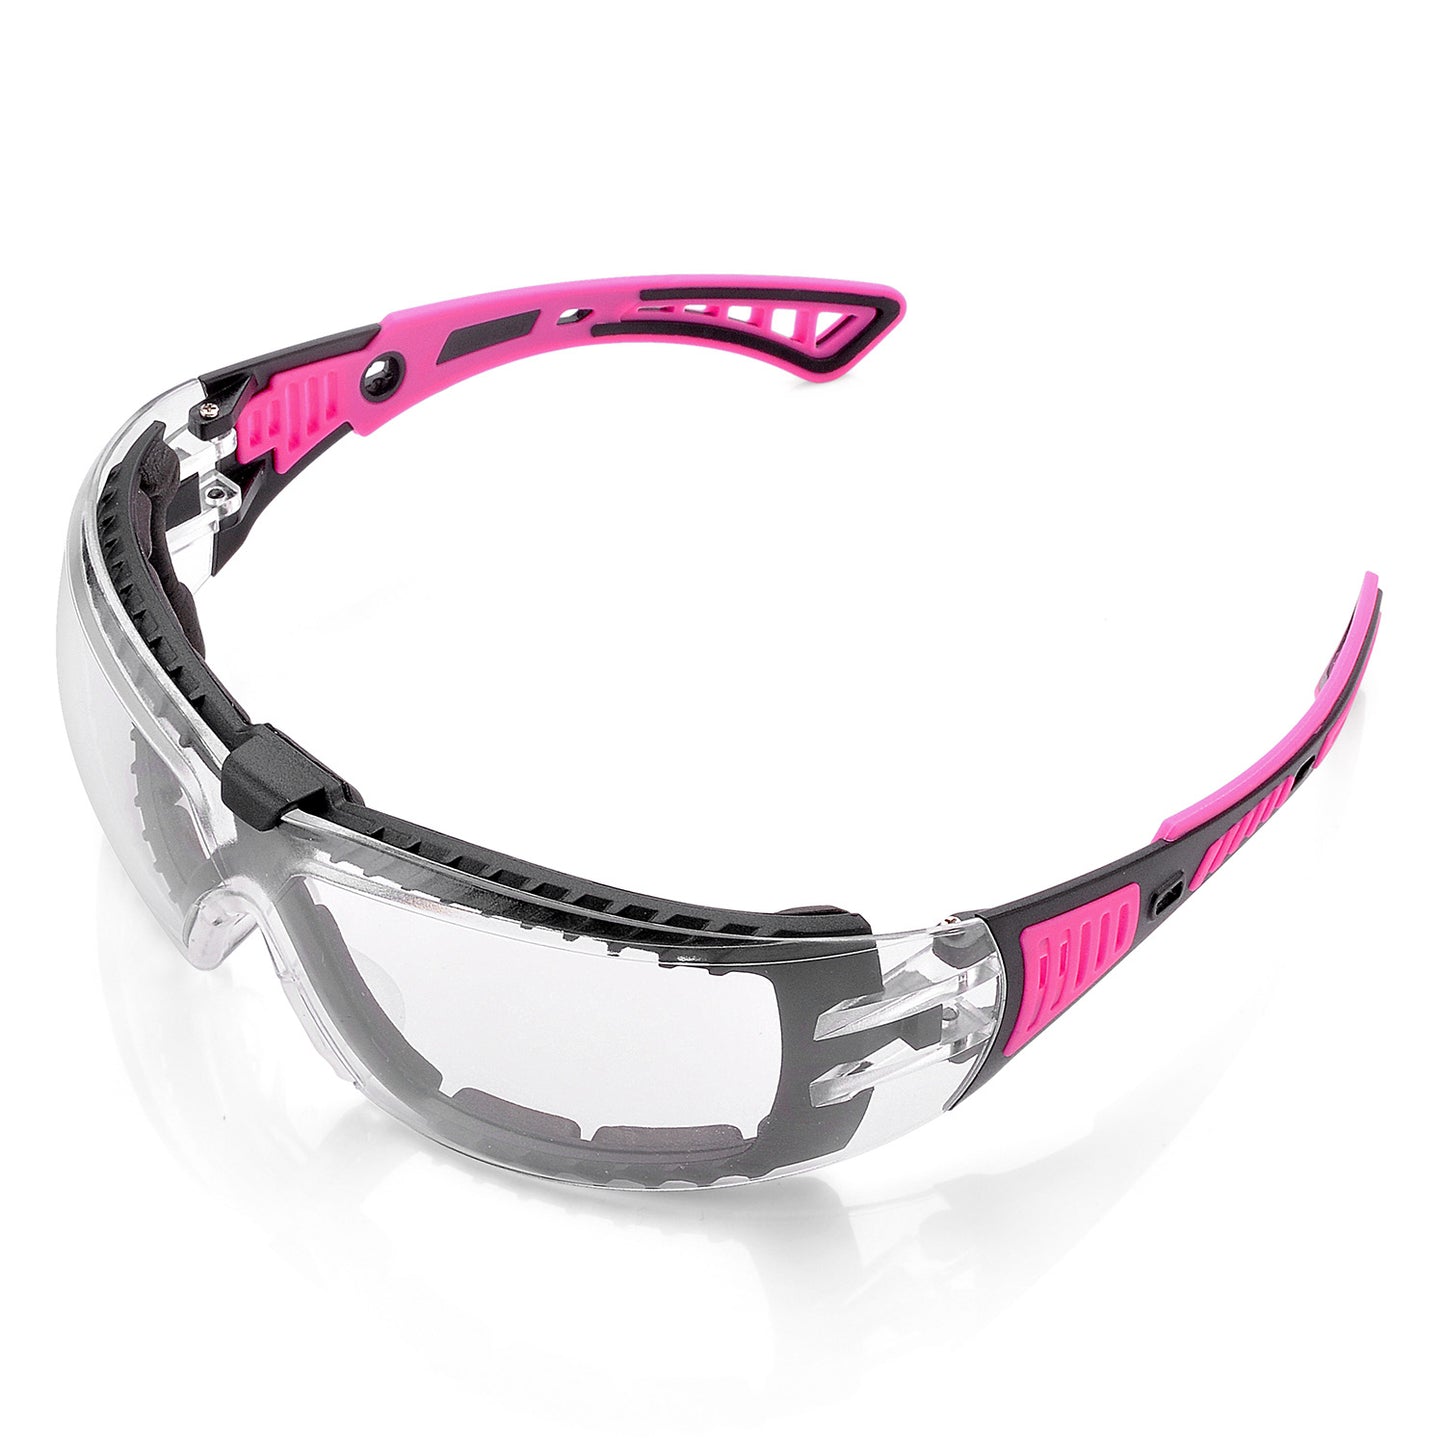 SAFEYEAR Womens Anti Fog Safety Goggles with HD Anti Scratch Resistant Lenses Work Goggles for Women, Adjustable Neck Cord,UV Protection Pink Safety Glasses for DIY, Lab,Grinding,Cycling, MTB